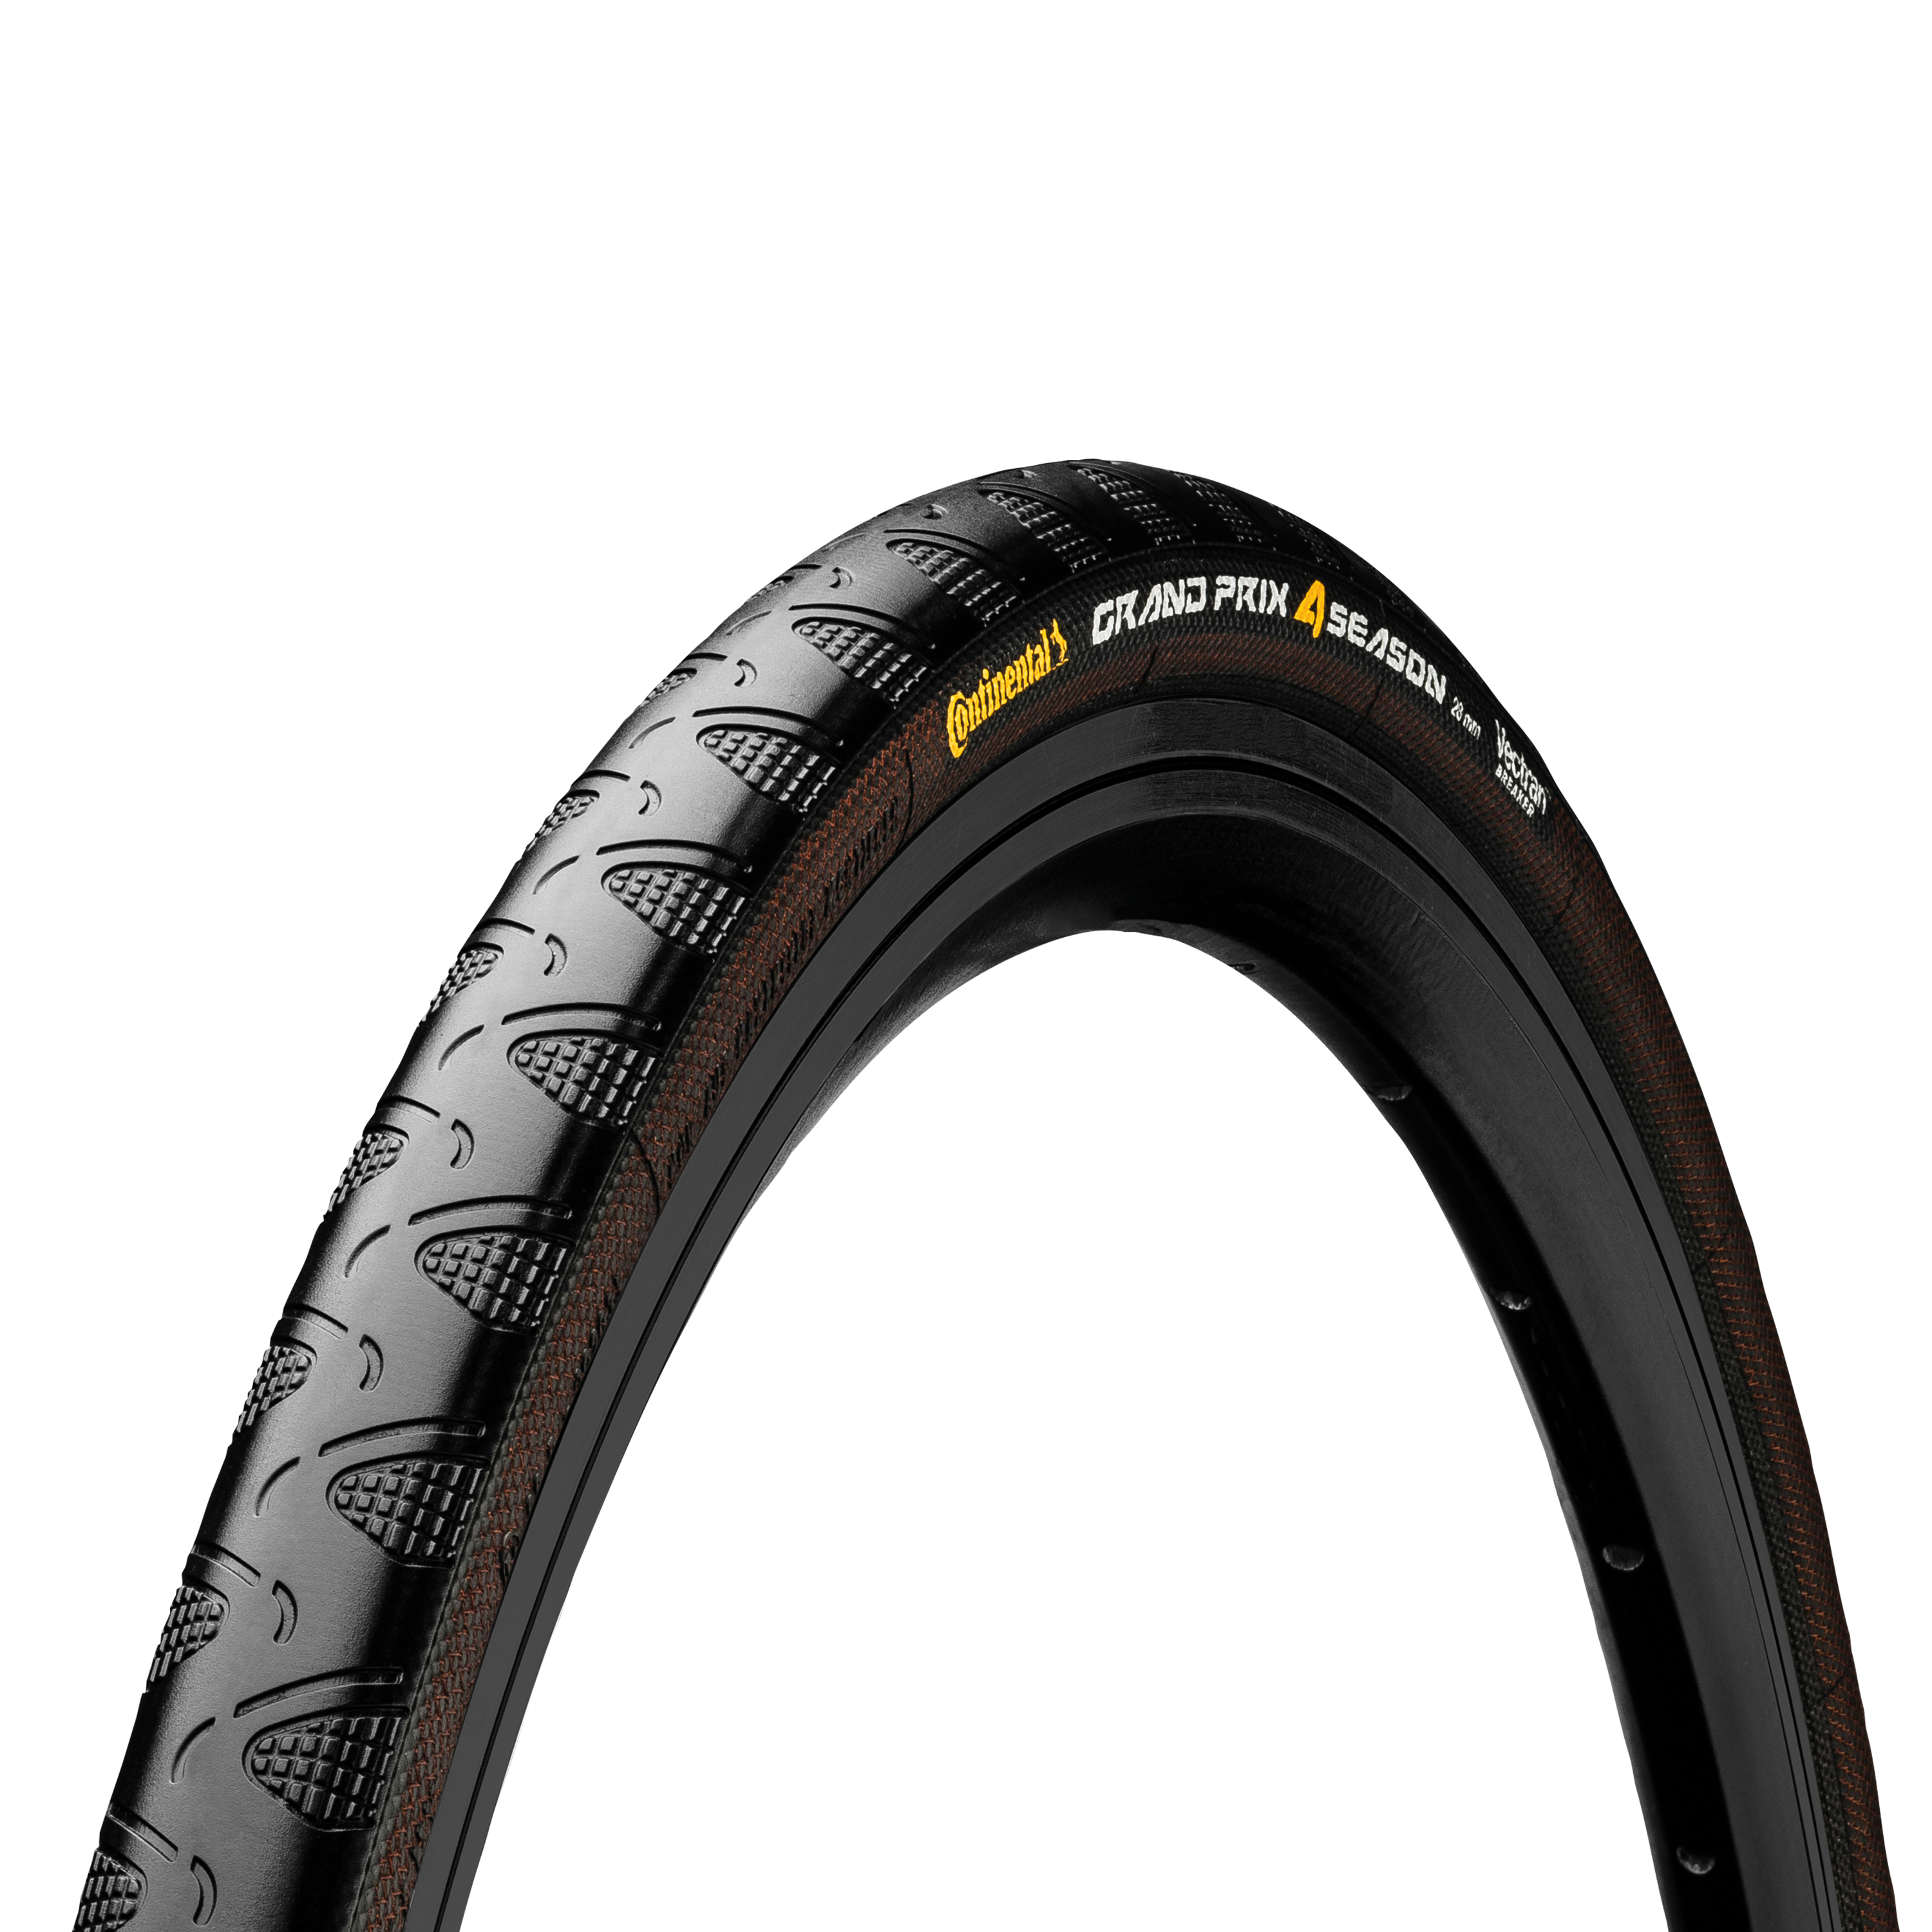 companion for mileage Grand Prix reliable cyclists The all-year-round a 4-Season: road tire high those and